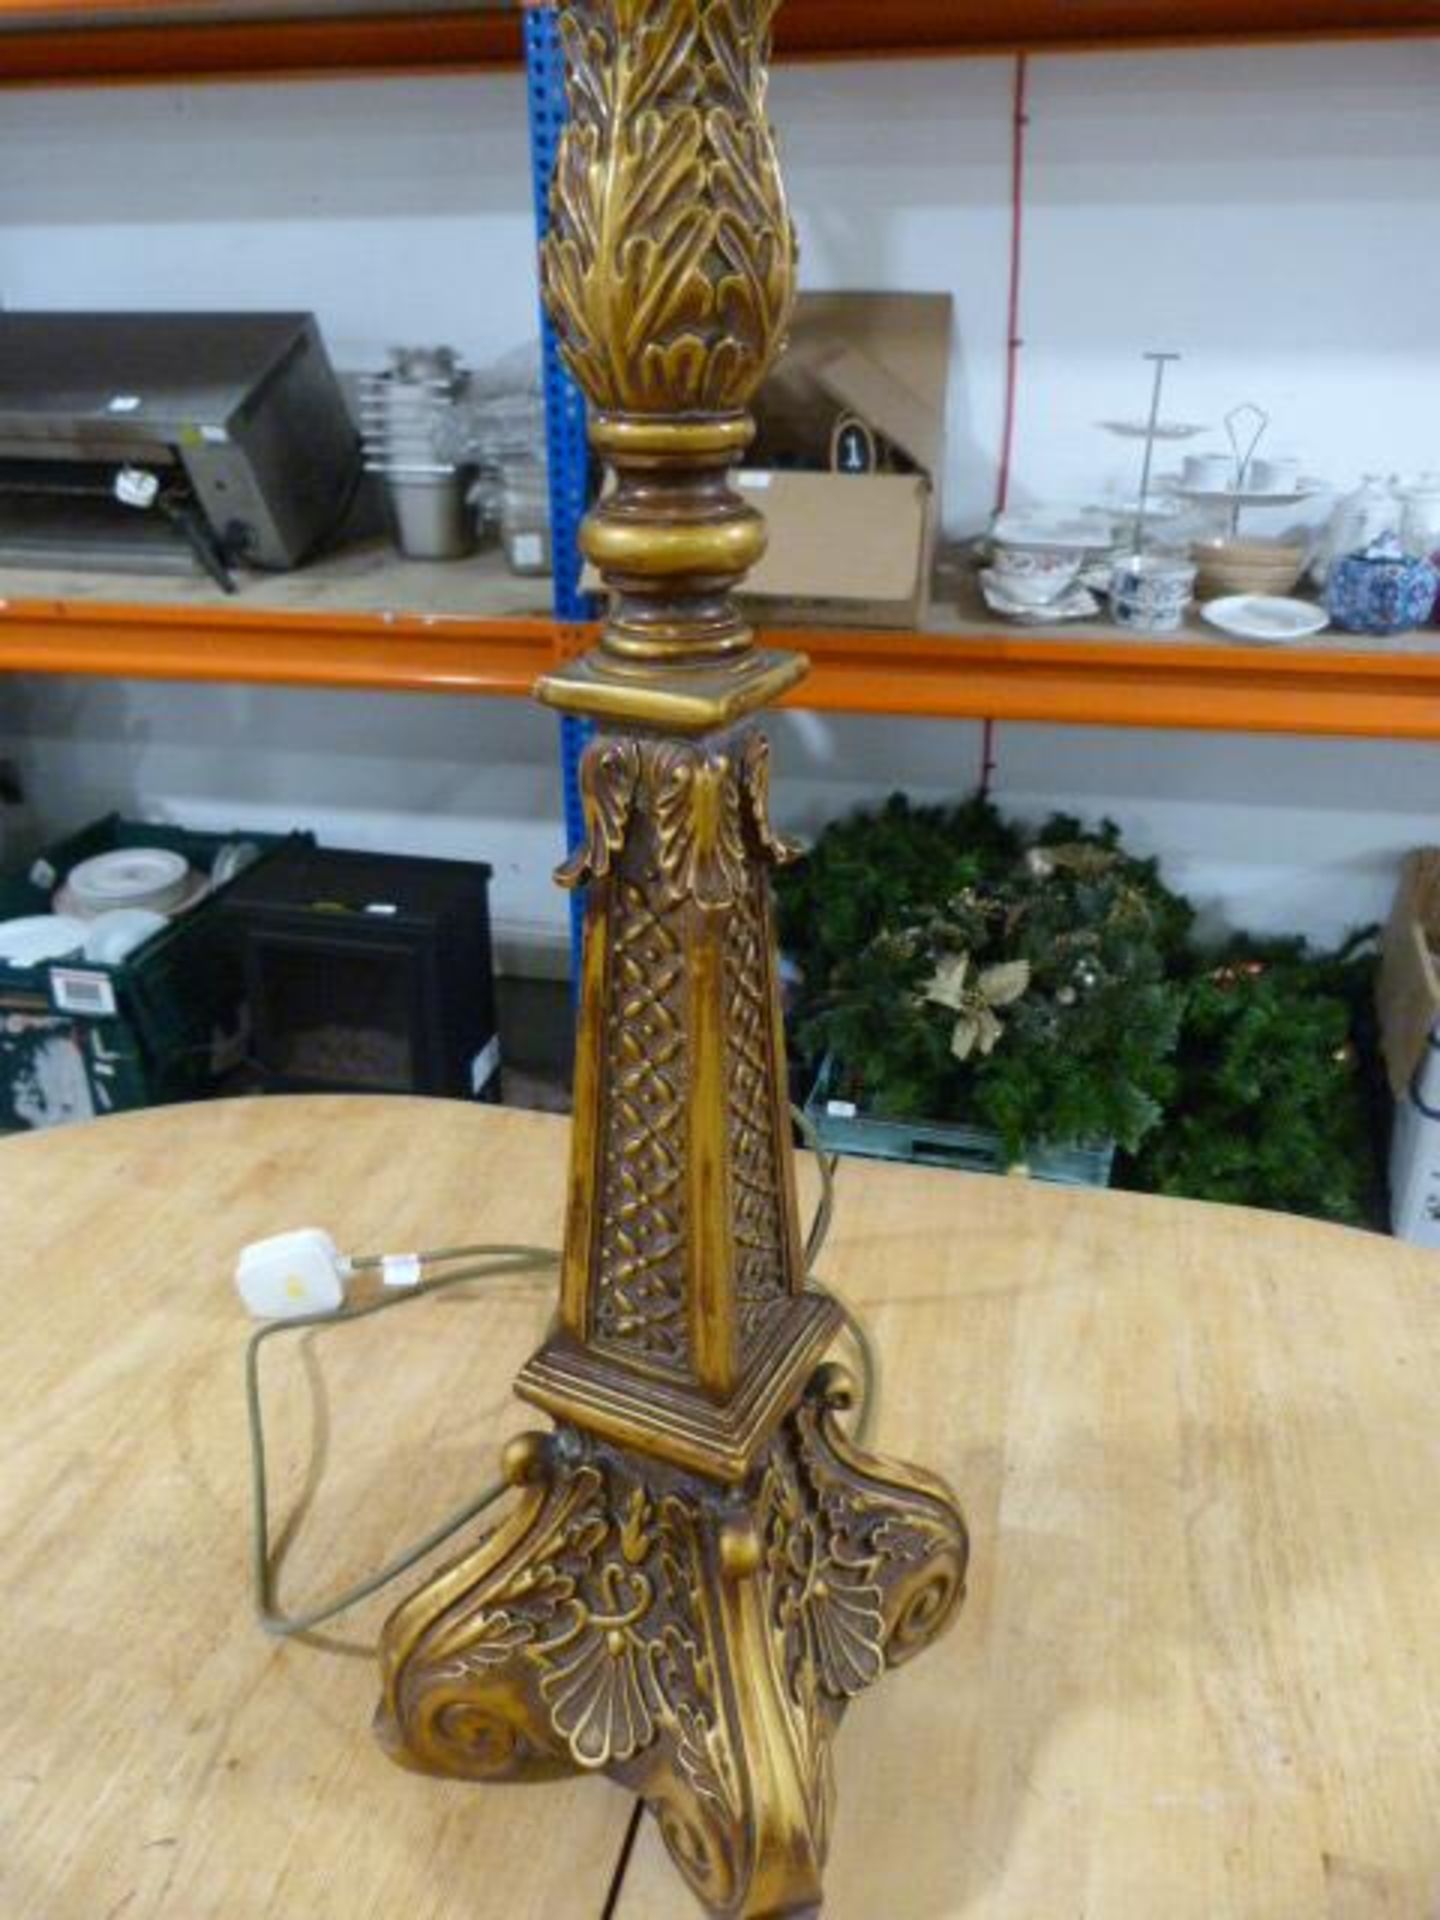 Large Reproduction Table Lamp ~3'5" with Shade - Image 2 of 2